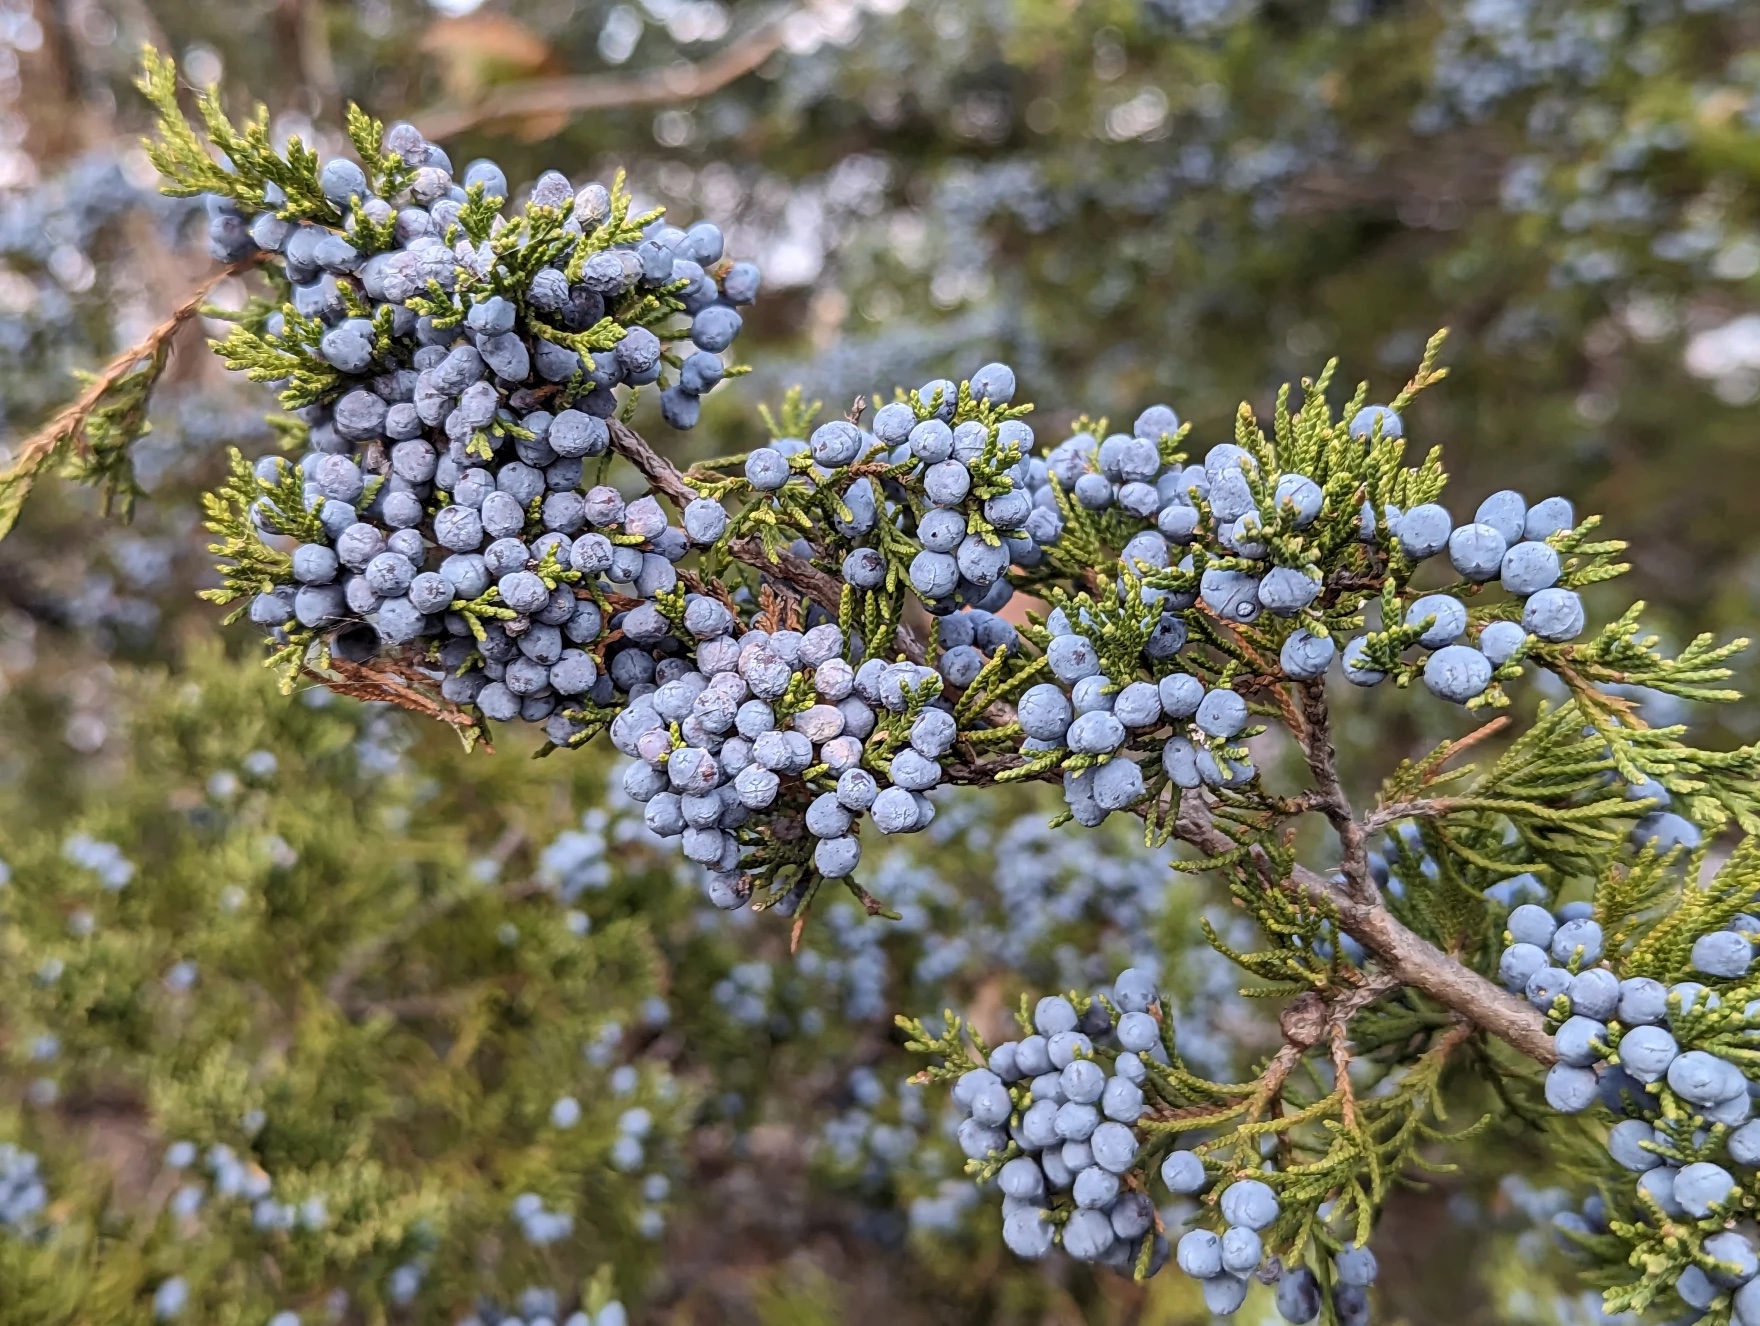 A bush branch covered in buds that look like blueberries.